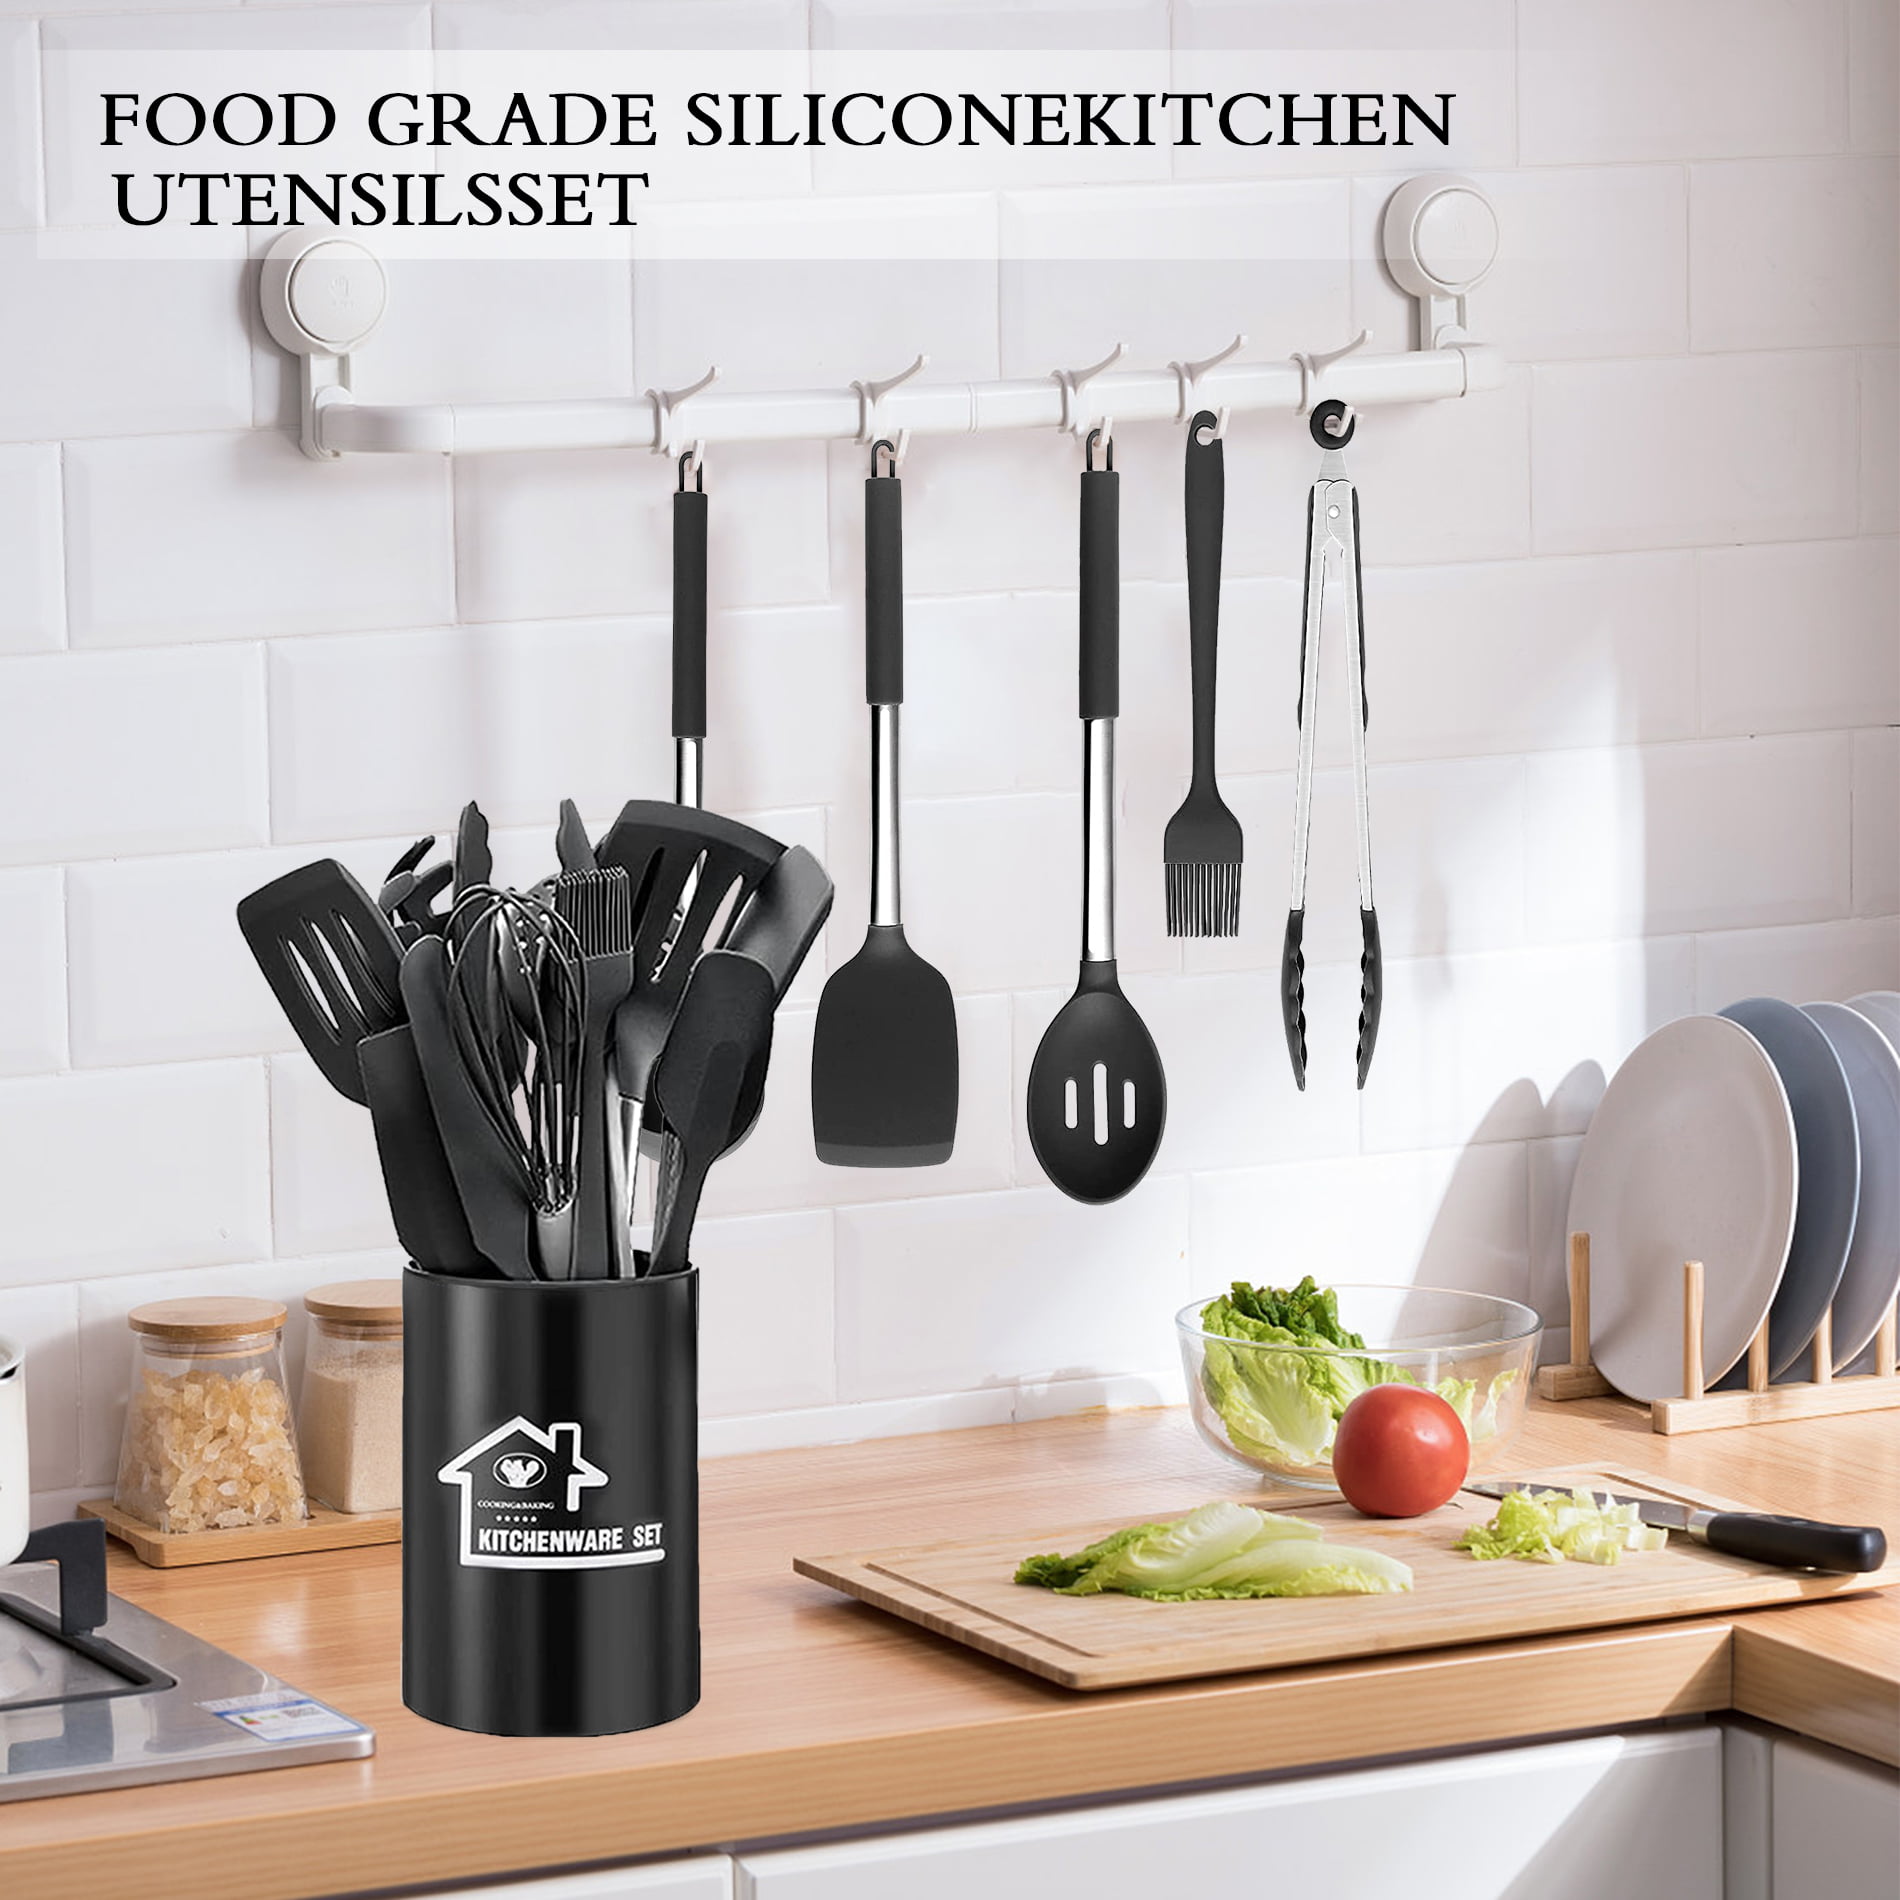 Cibeat Kitchen Silicone Utensil Set, 13 Pcs Silicone Handle Heat Resistant Cooking  Utensils BPA Free, Non-Stick Cookware with Holder, Black 